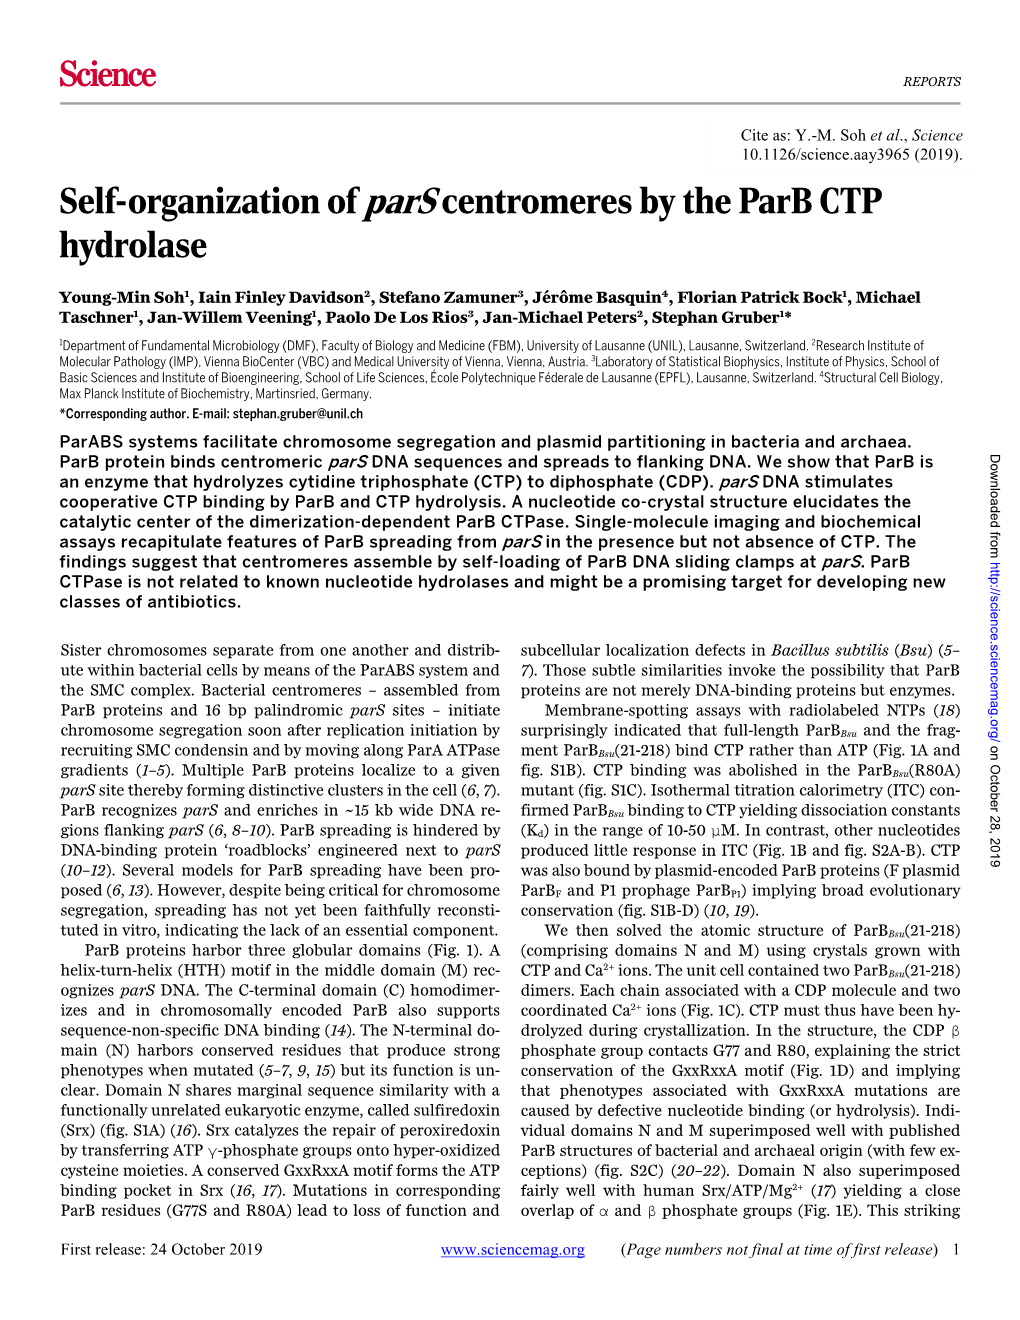 Self-Organization of Pars Centromeres by the Parb CTP Hydrolase